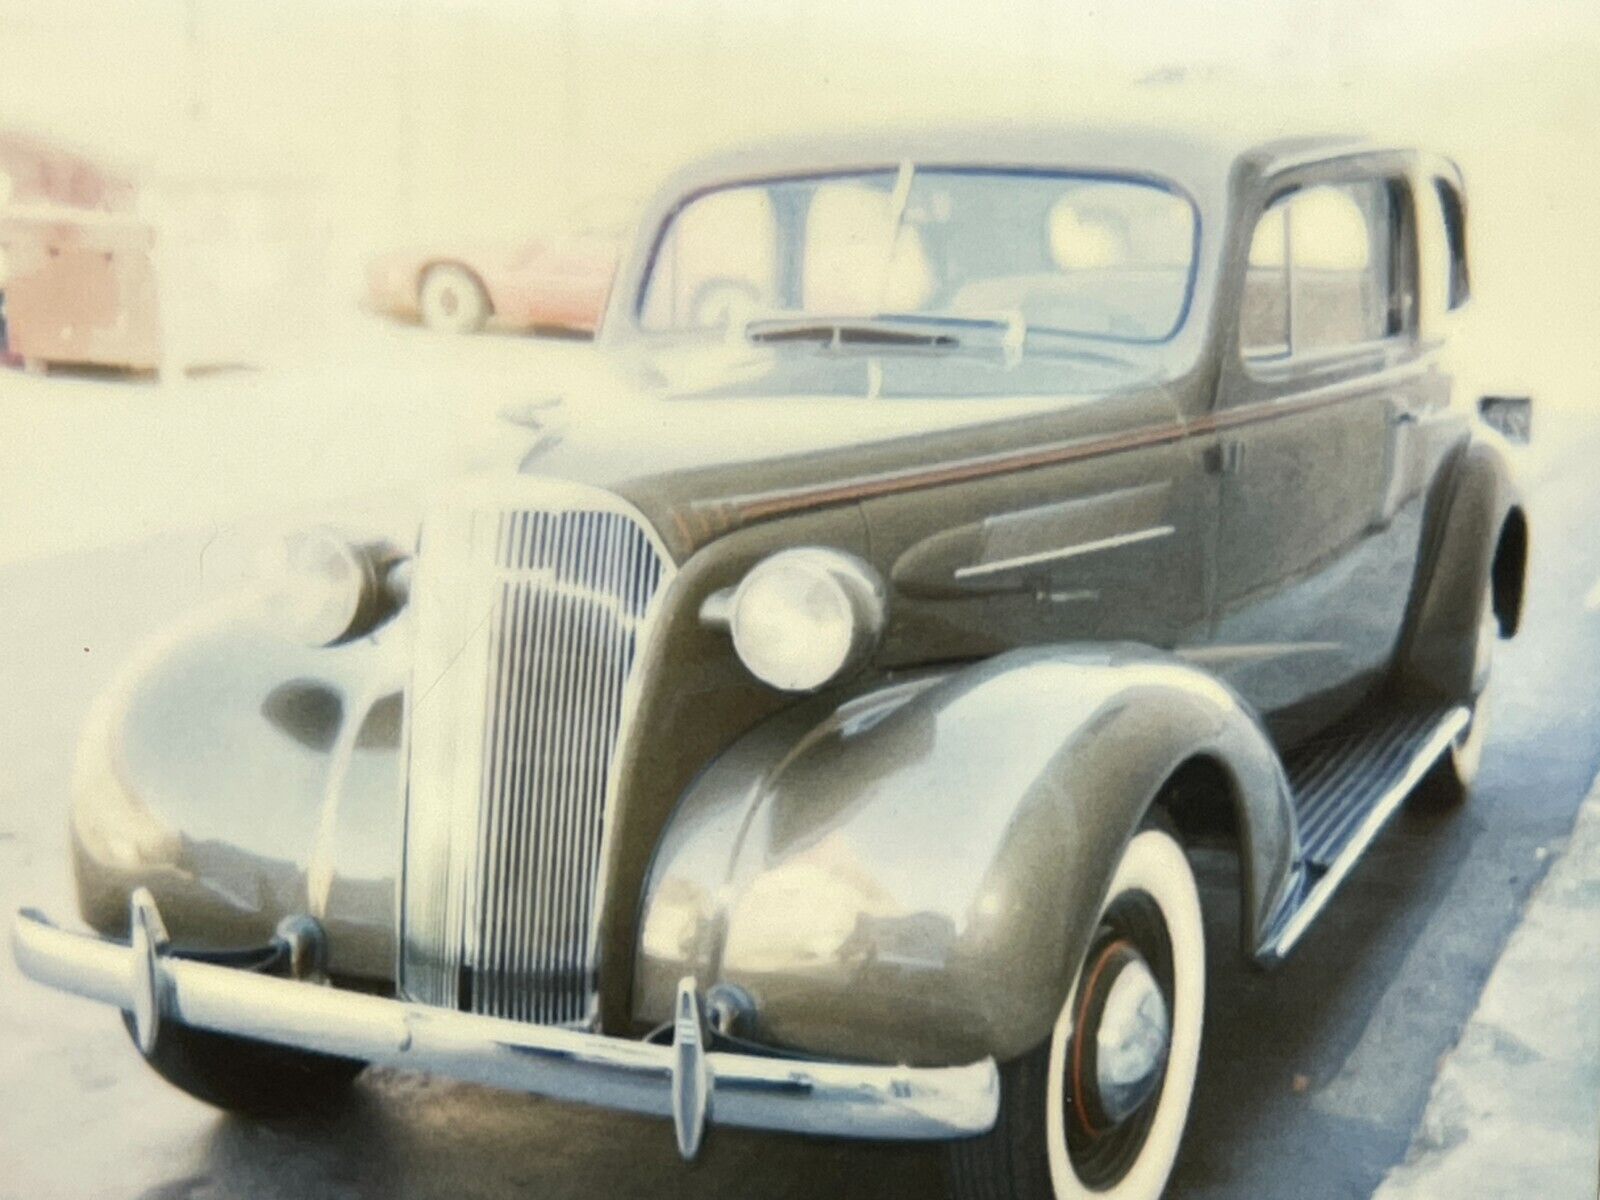 CCH 2 Photographs From 1980-90's Polaroid Artistic Of A 1937 Chevy Chevrolet